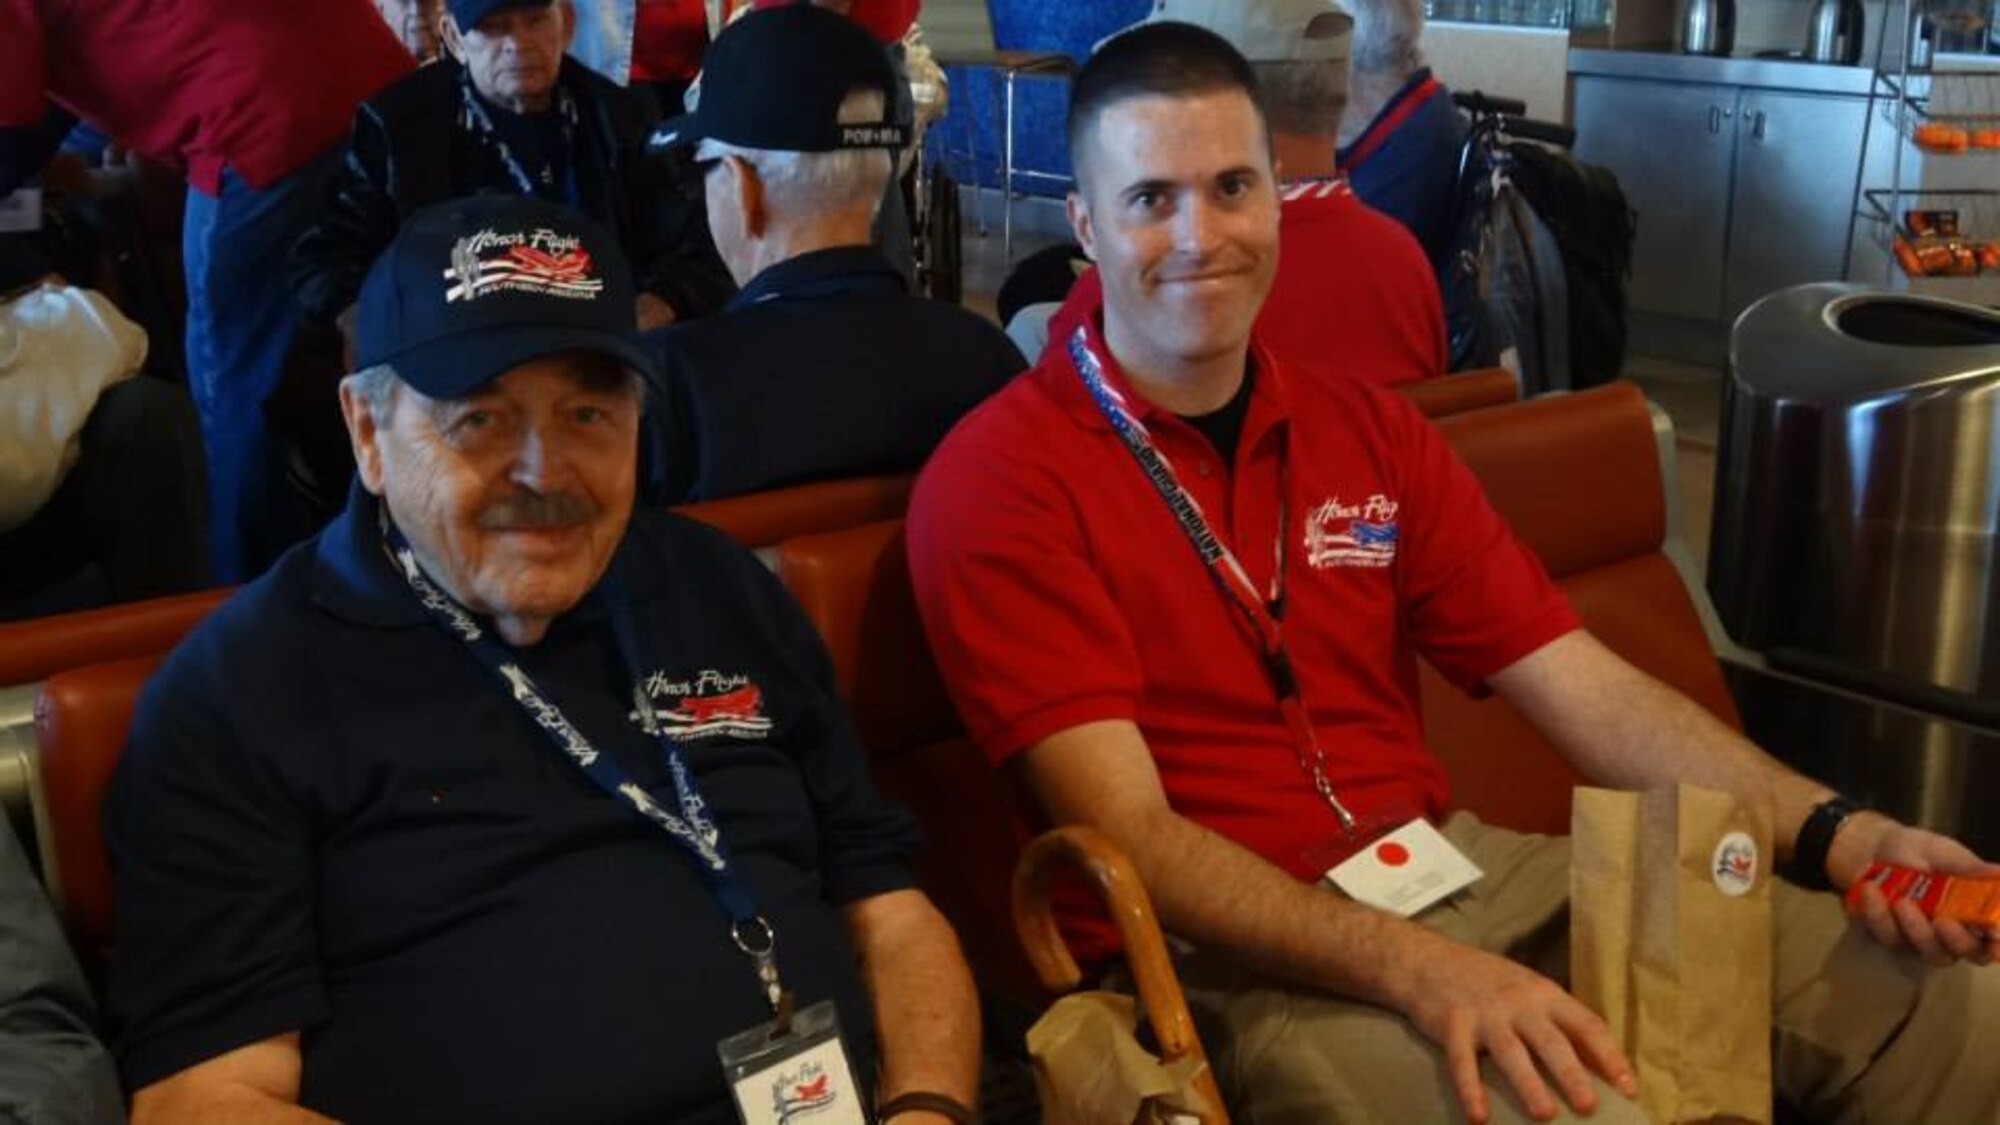 U. S. Air Force Staff Sgt. David Wilcken, 612th Air and Space Operations Center air tasking order production technician, and Robert Yeschek, a World War II, Korean War and Vietnam War veteran, pose at an airport during the Southern Ariz. Honor Flight Trip, Oct. 7, 2013. Wilcken flew with Yeschek during Honor Flight to be his guardian for the duration of the trip. (Courtesy photo) 

